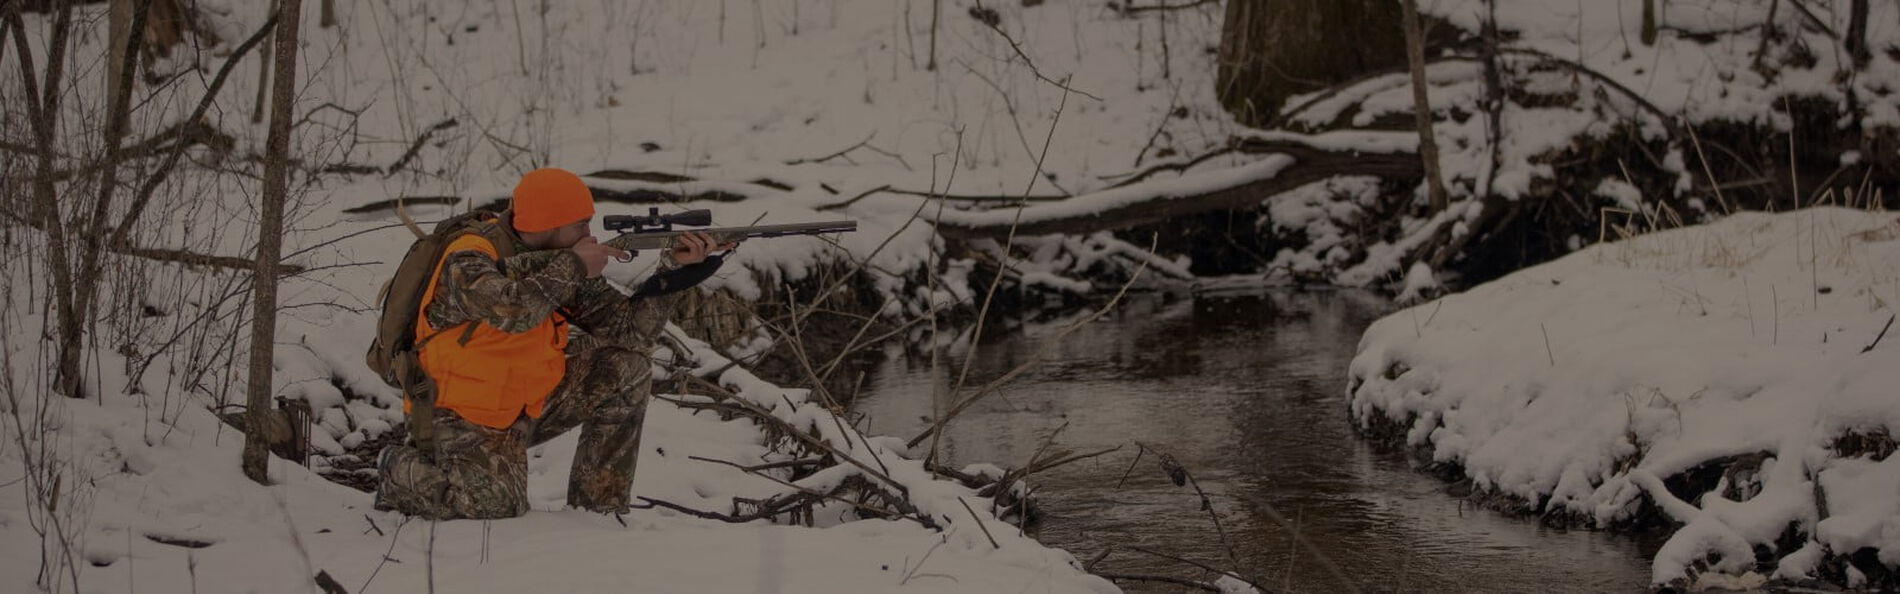 hunter kneeling in the snow while aiming a rifle